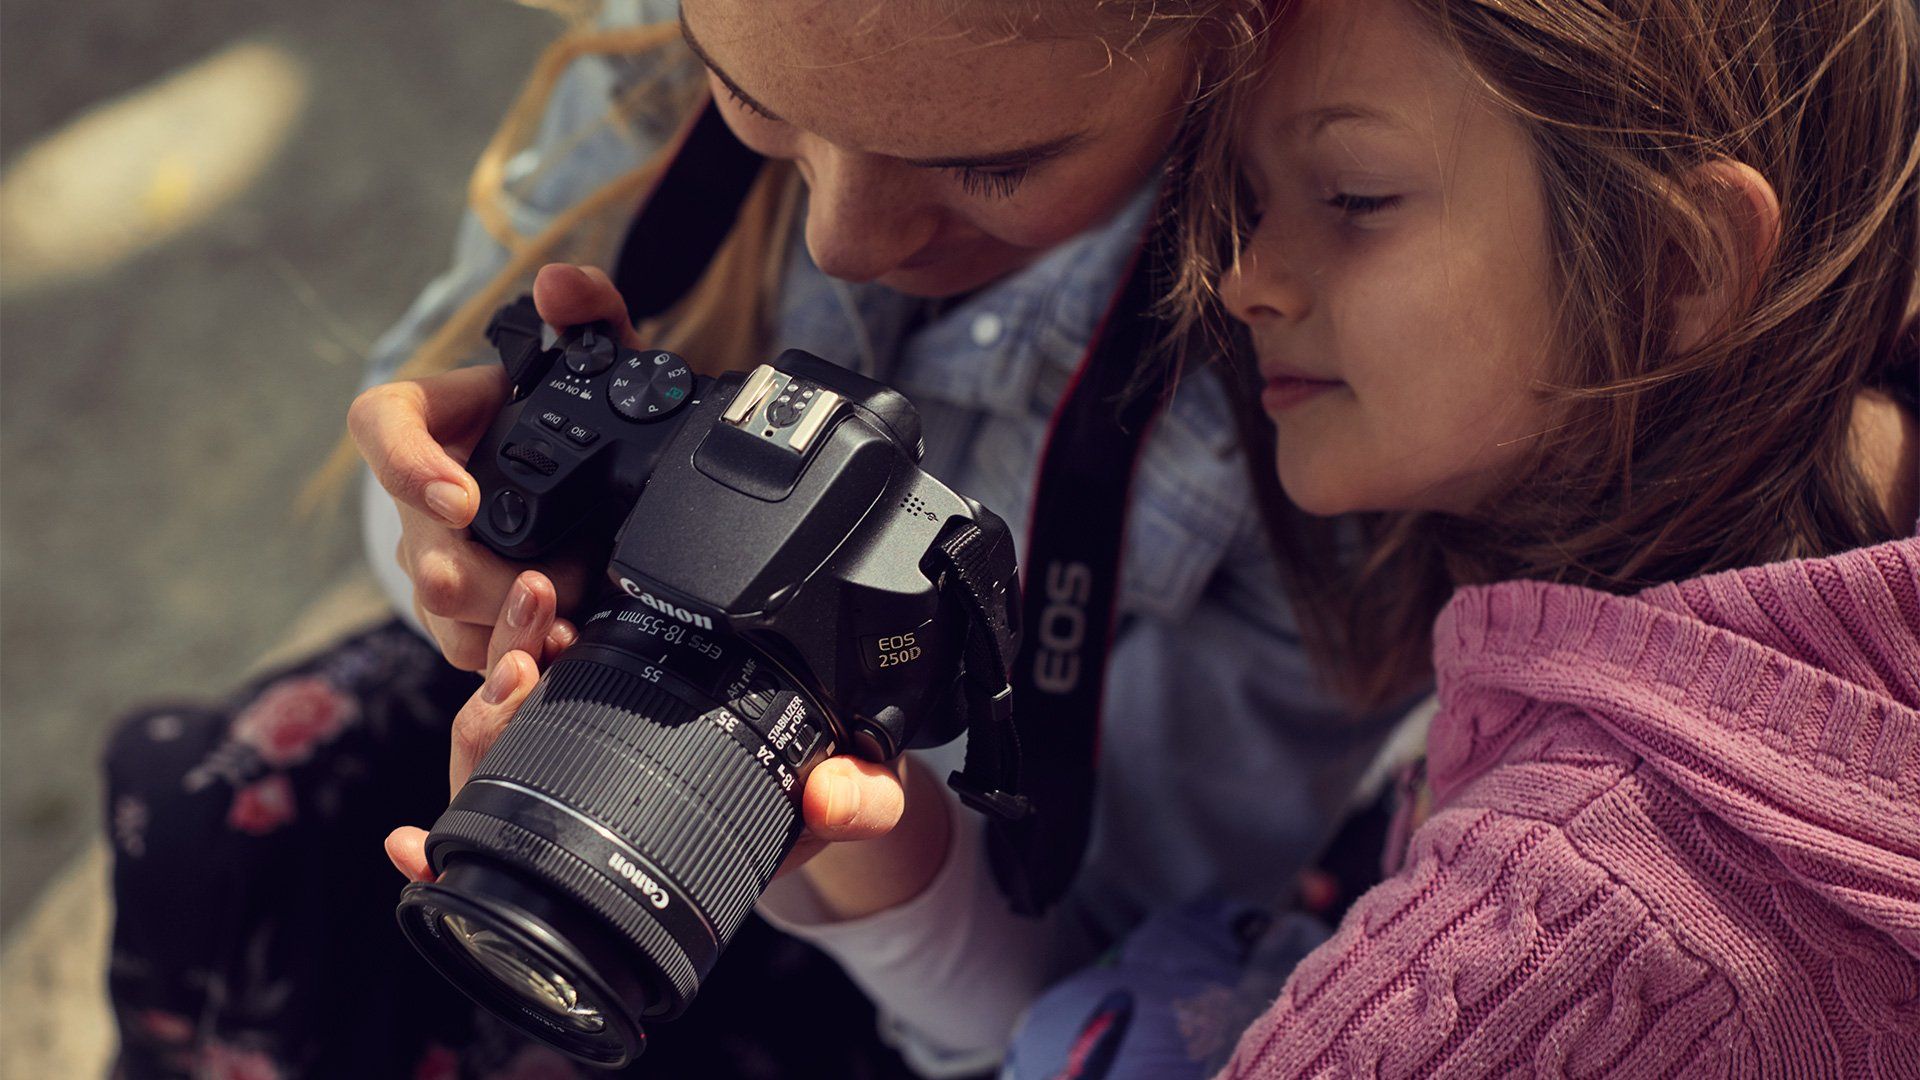 A woman lifts a Canon EOS 250D to take a photo of her daughter.